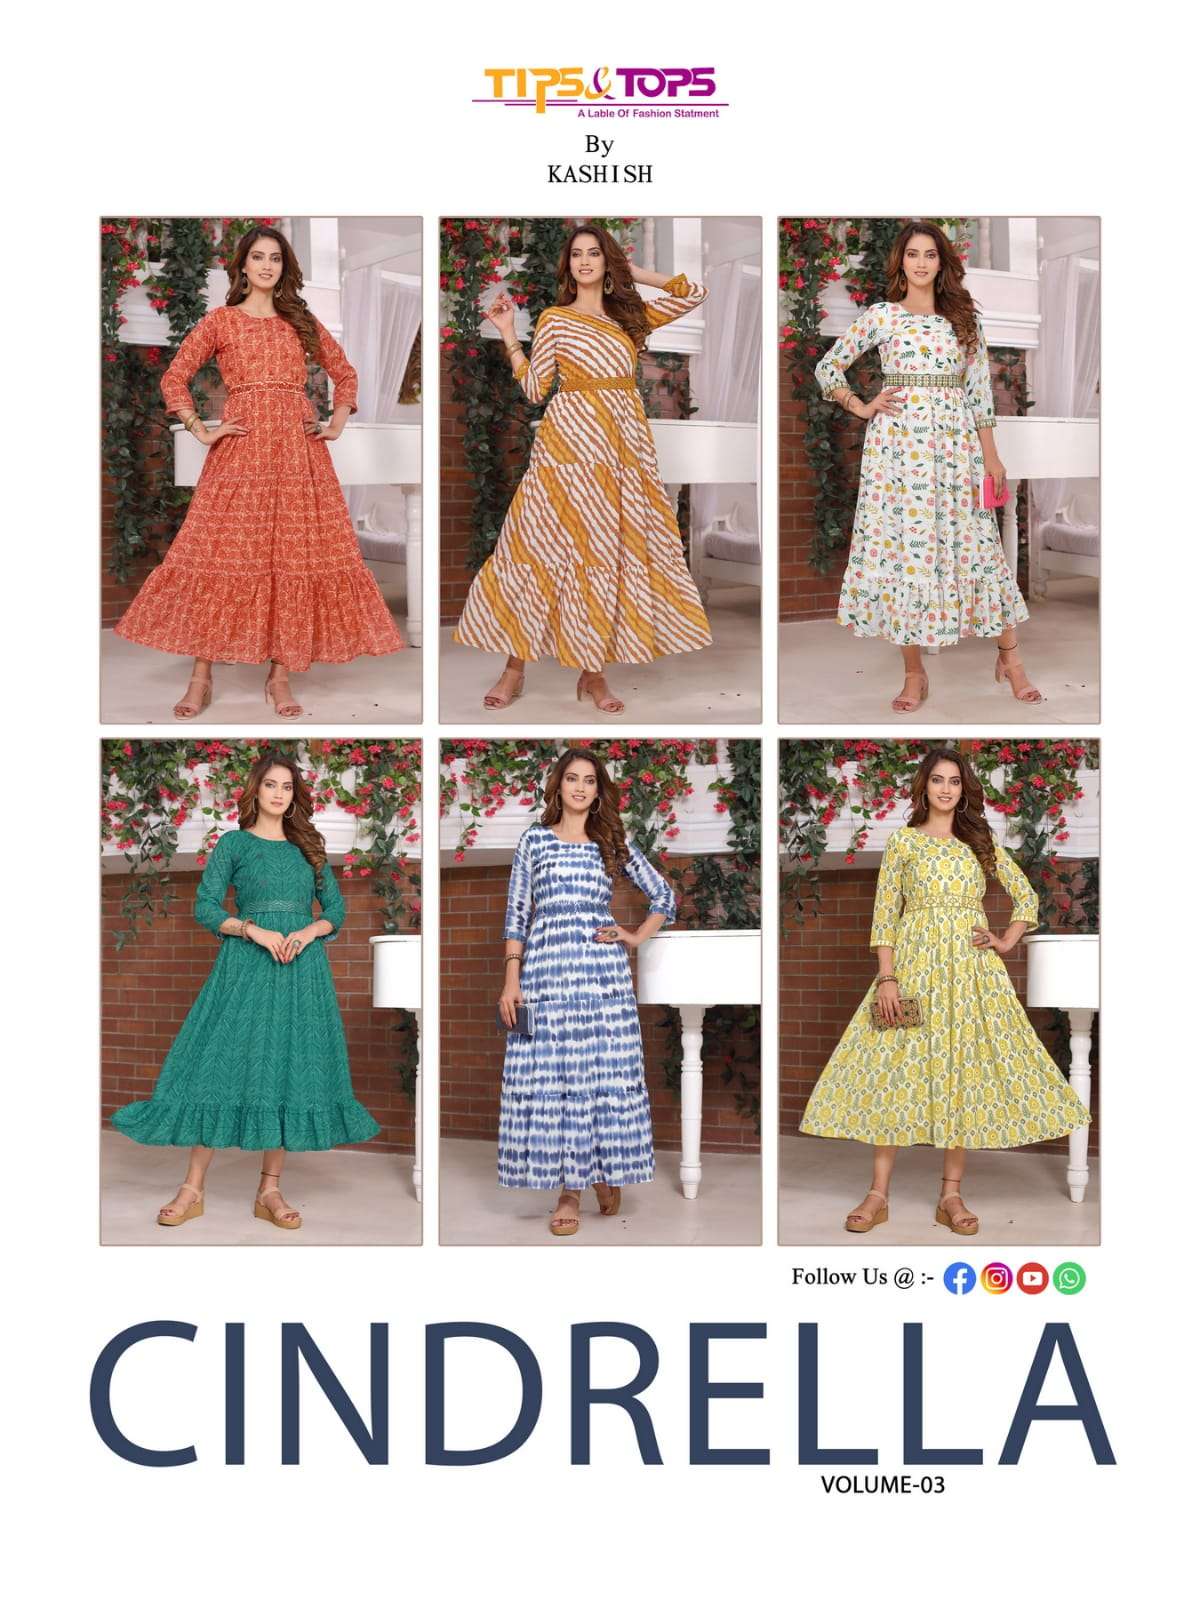 tips and tops cindrella vol-3 georgette heavy kurtis collection wholesale price surat